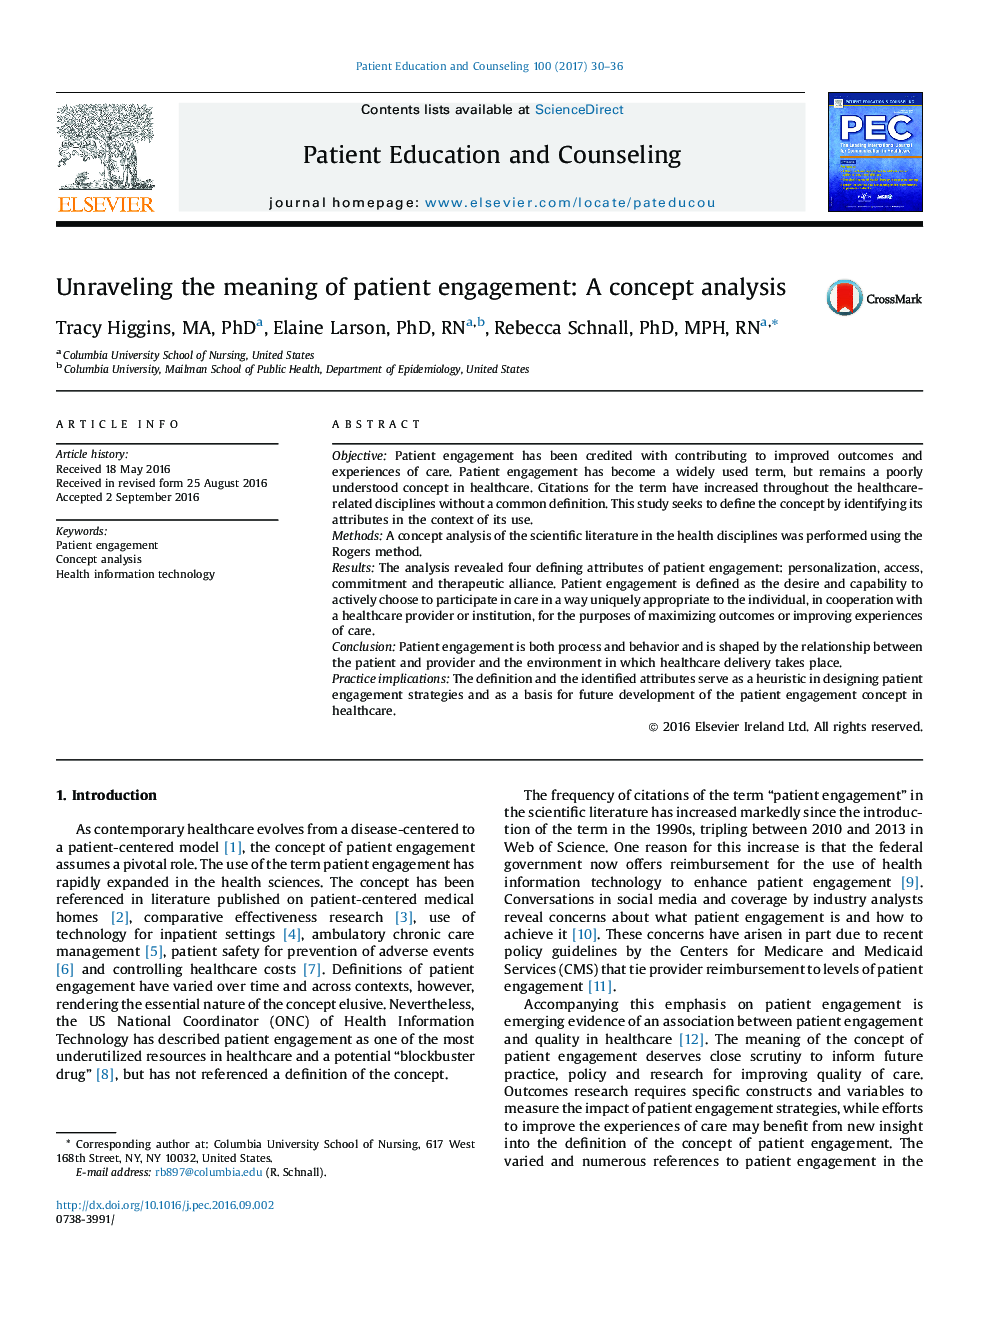 Unraveling the meaning of patient engagement: A concept analysis